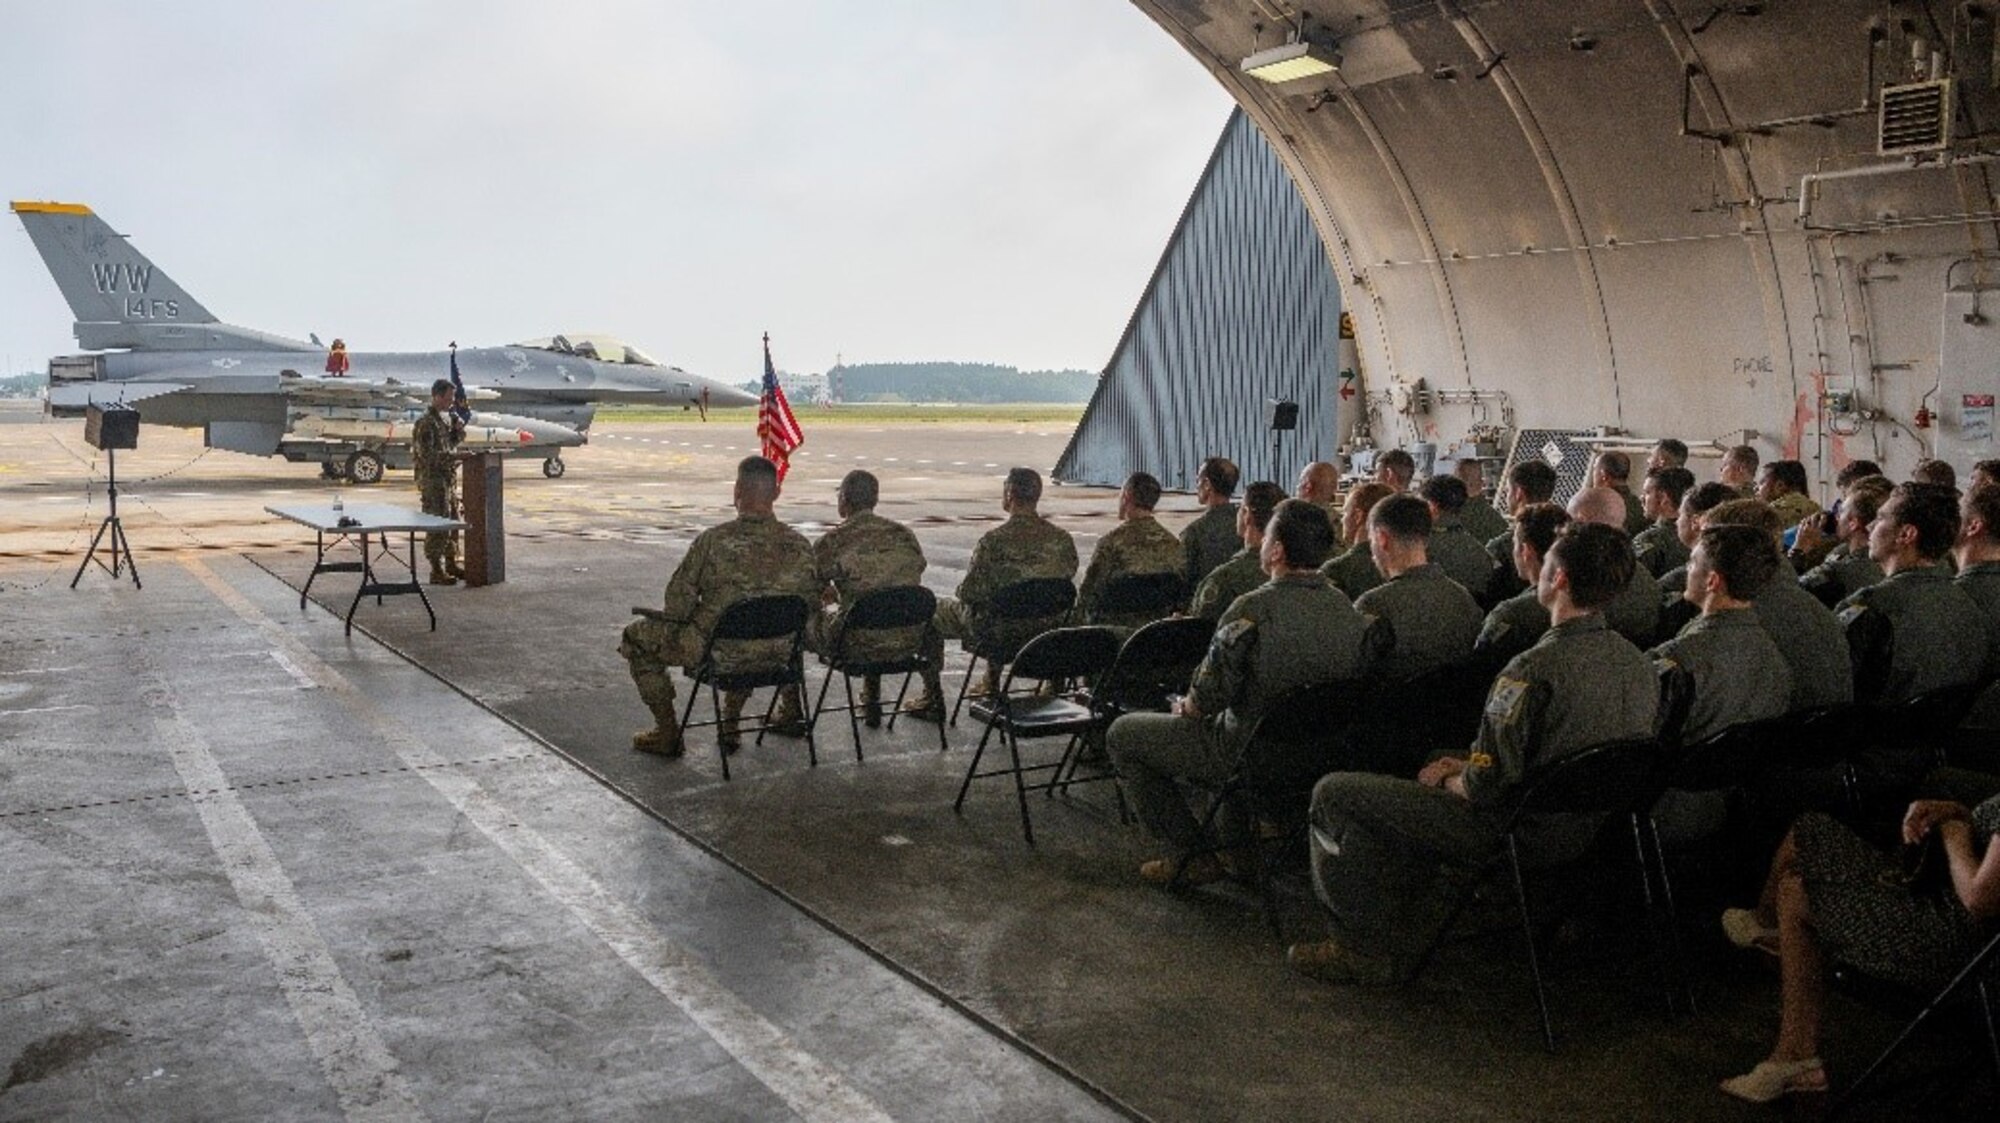 Airmen in a hanger attending a ceremony with fighter jet in the background.